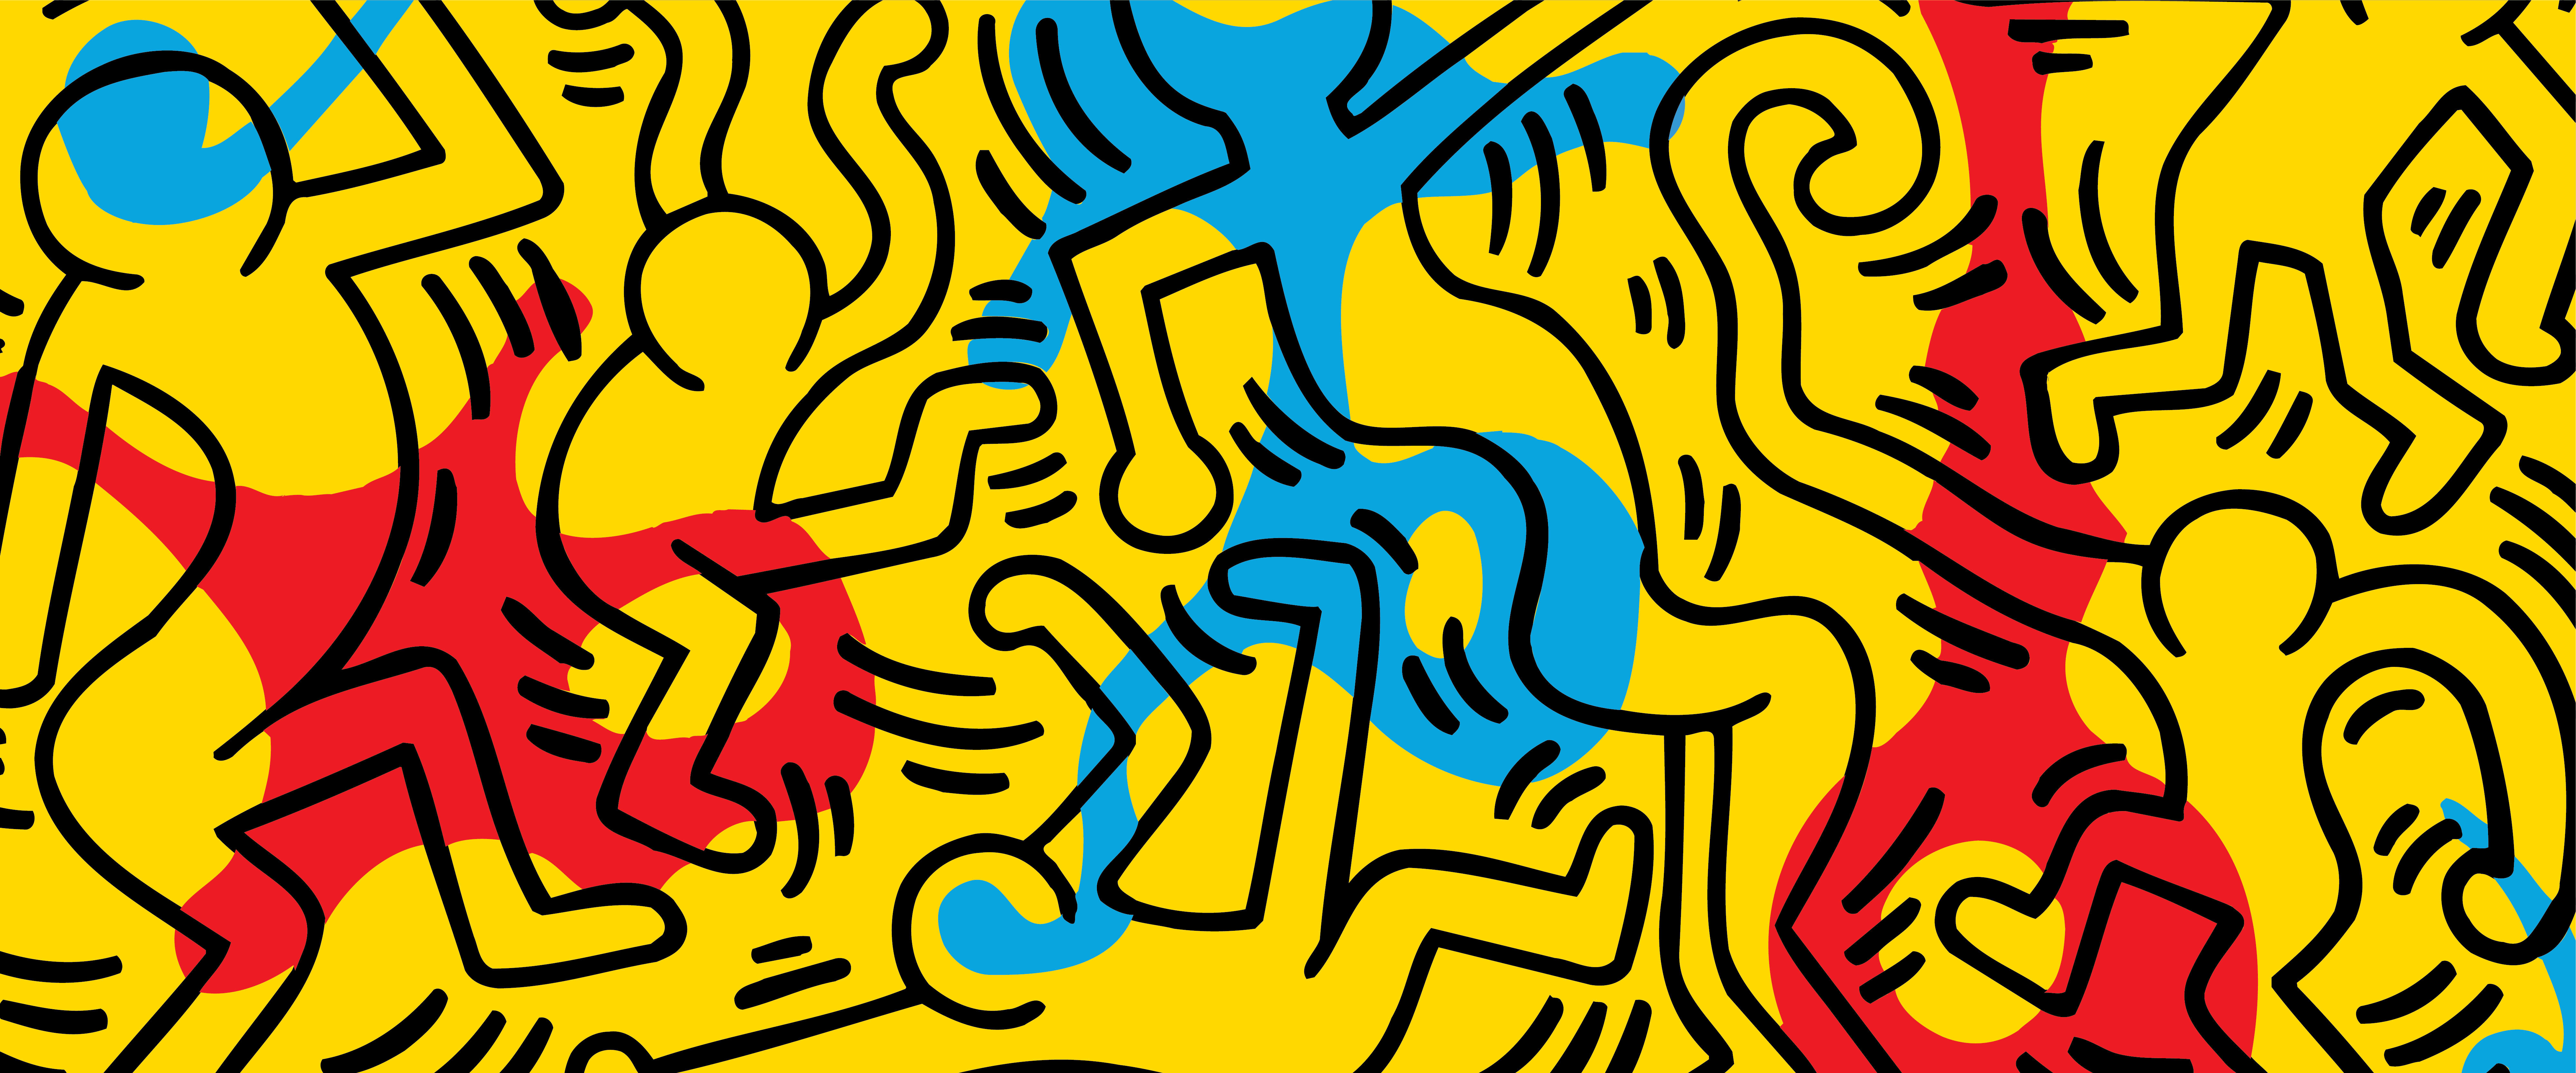 Keith Haring Wallpapers Top Free Keith Haring Backgrounds | Sexiz Pix